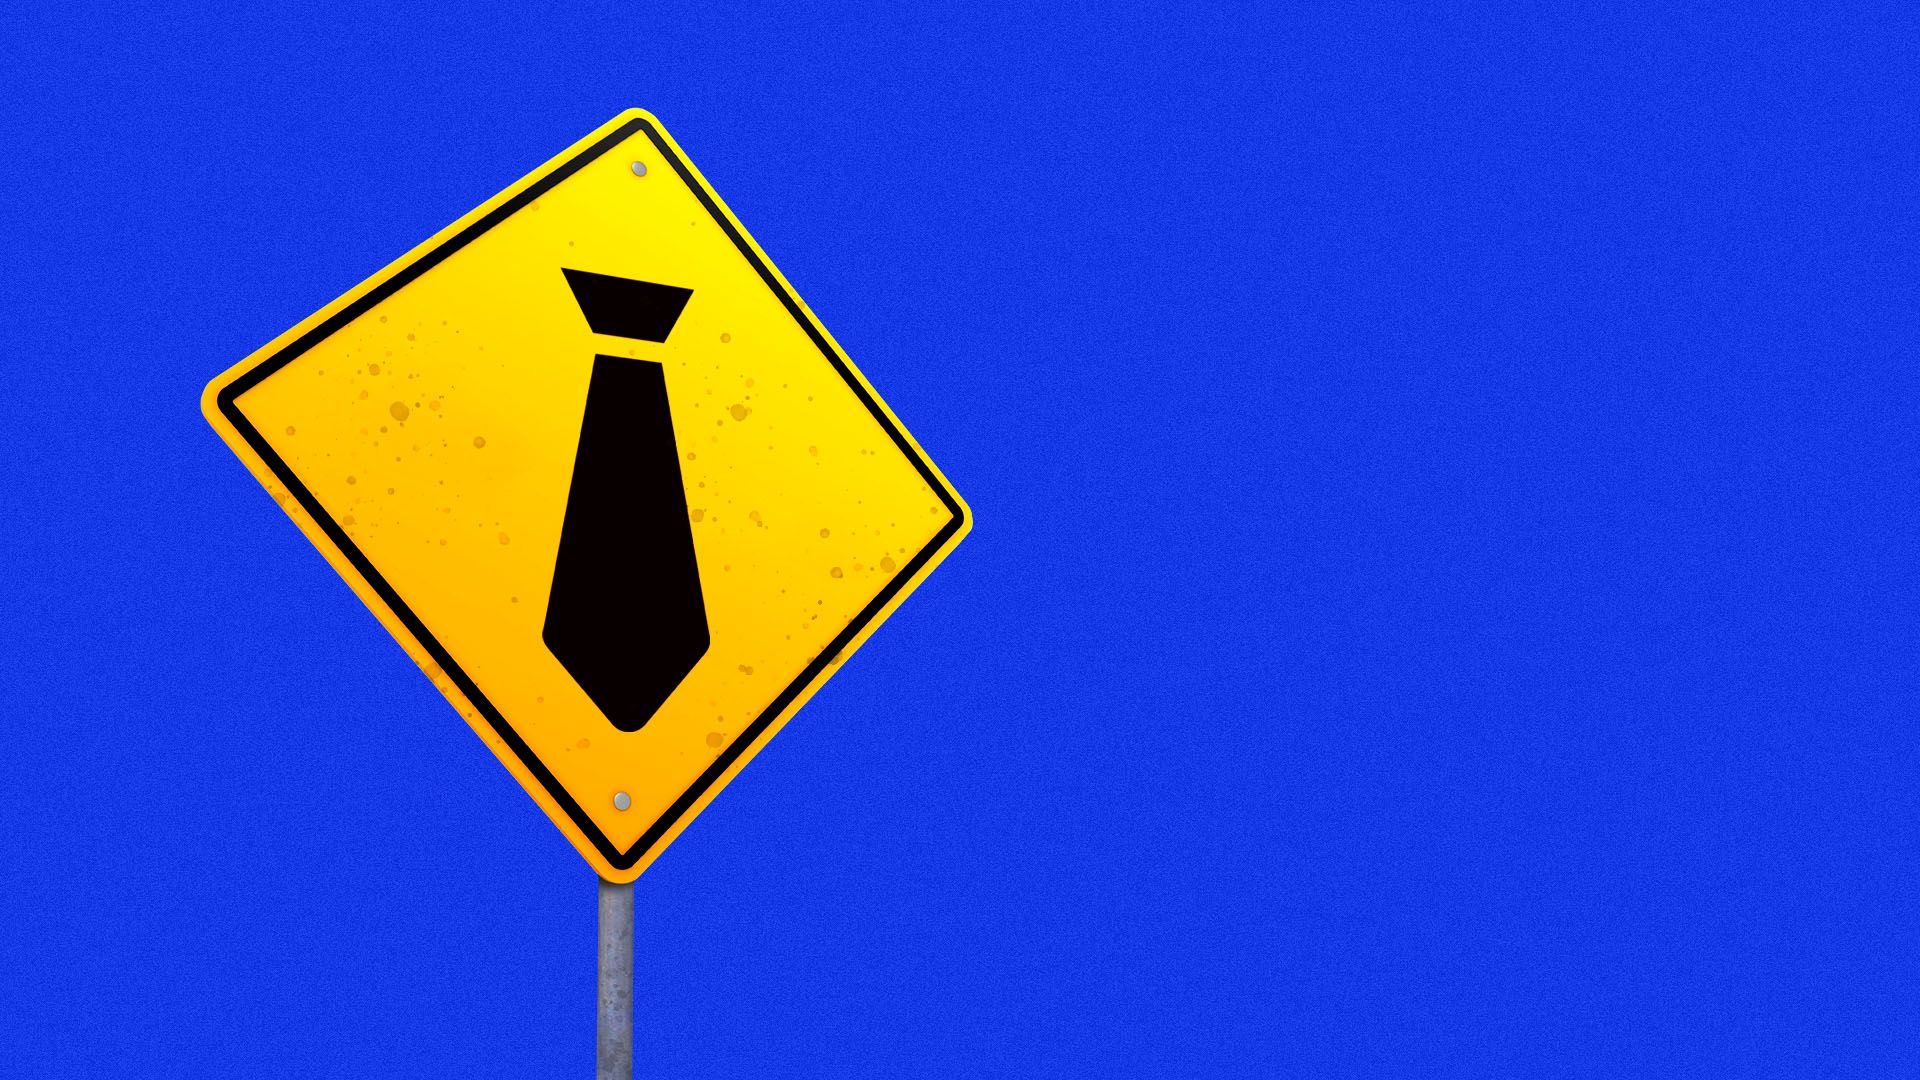 Illustration of a road caution sign with a tie icon on it.